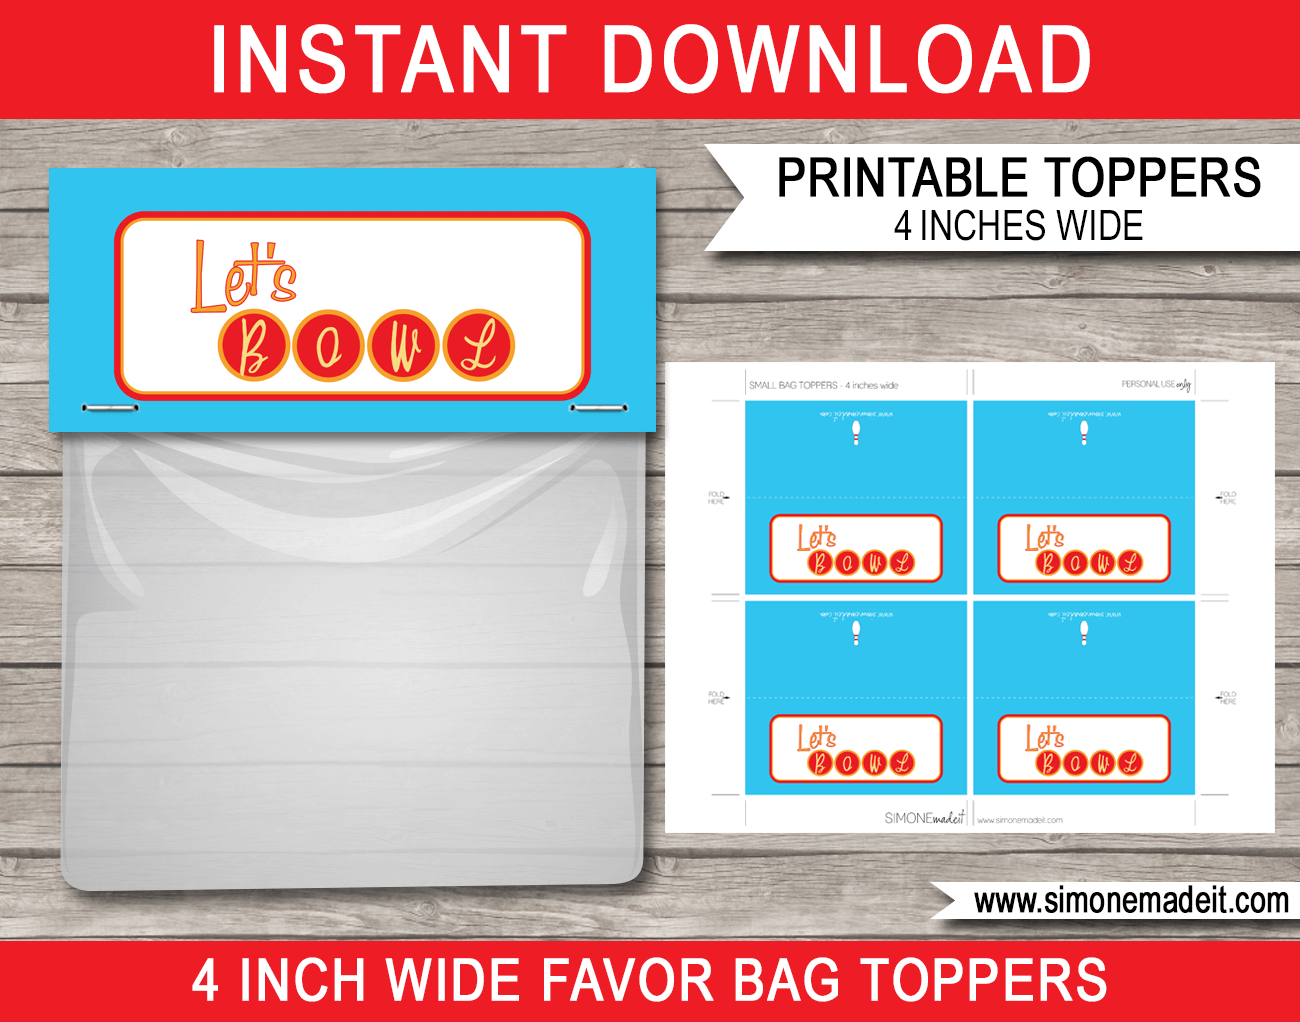 Bowling Party Favor Bag Toppers | Bowling Theme Birthday Party Favors | $3.00 INSTANT DOWNLOAD via SIMONEmadeit.com